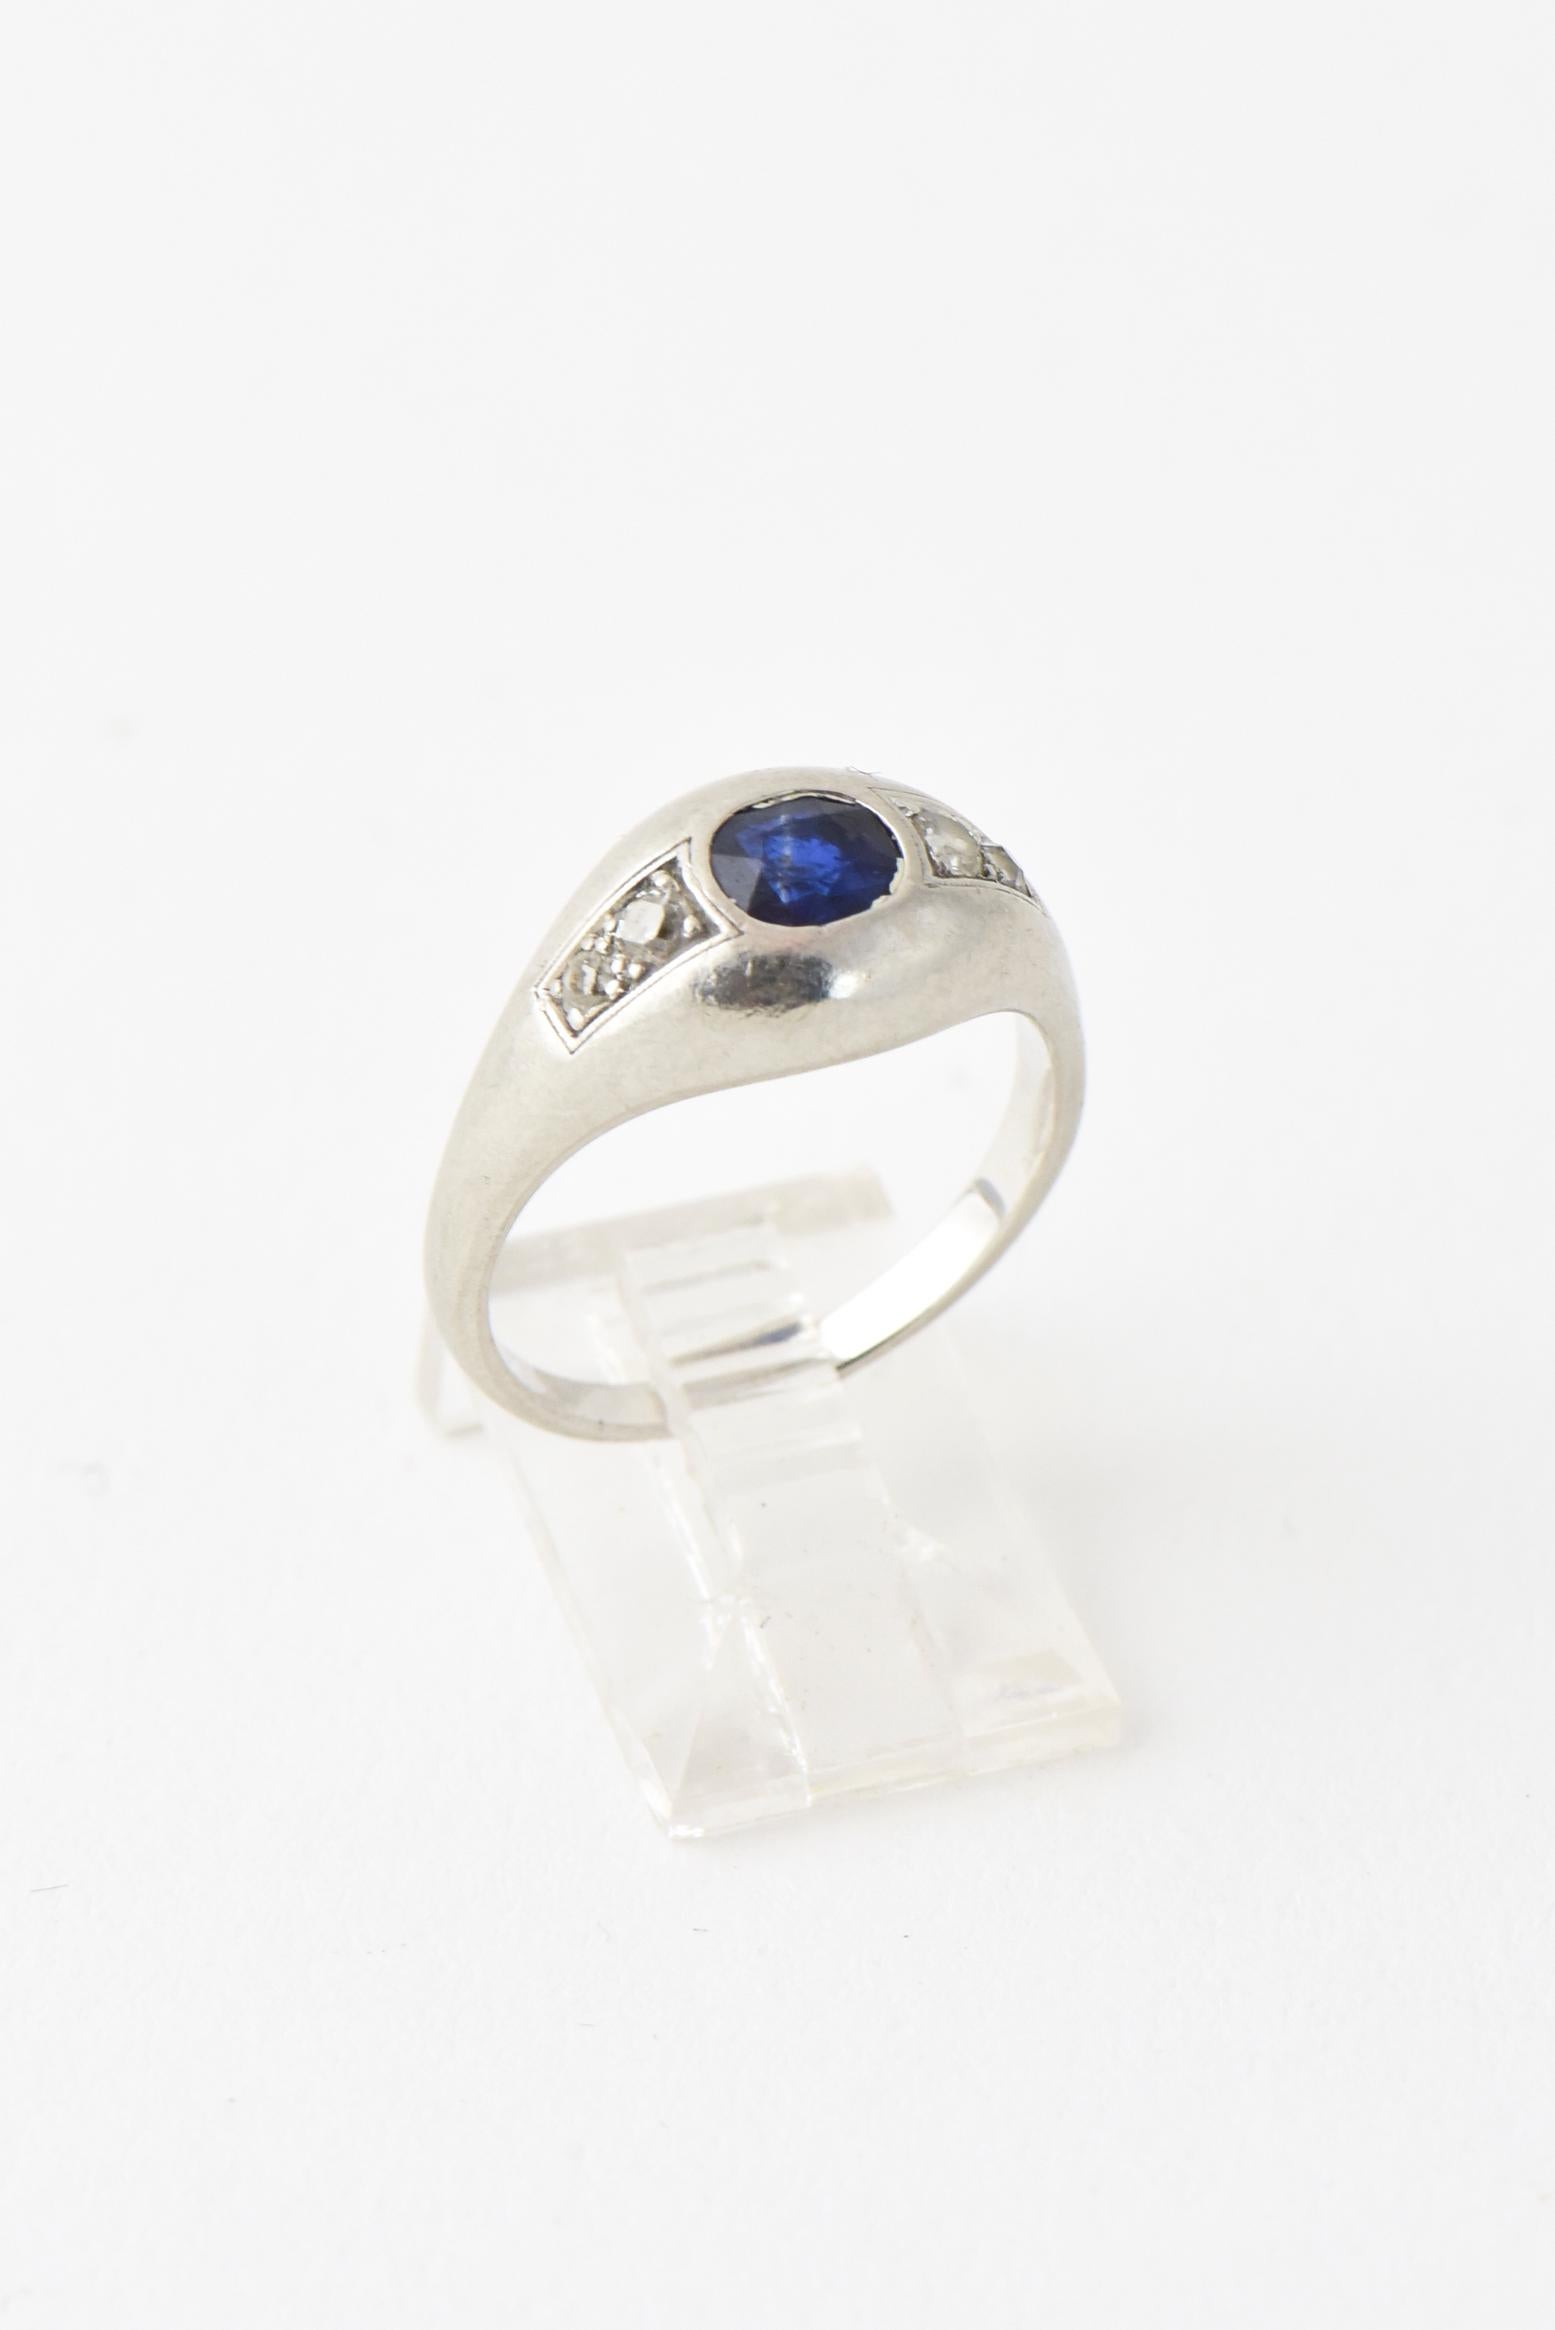 Art Deco platinum ring featuring an oval sapphire mounted with two diamonds on each side. US size 7.25; can be sized. Acid tests platinum, unmarked. The approximate weight of the stones is .50 carats for the sapphire and .16 carats for the diamonds.